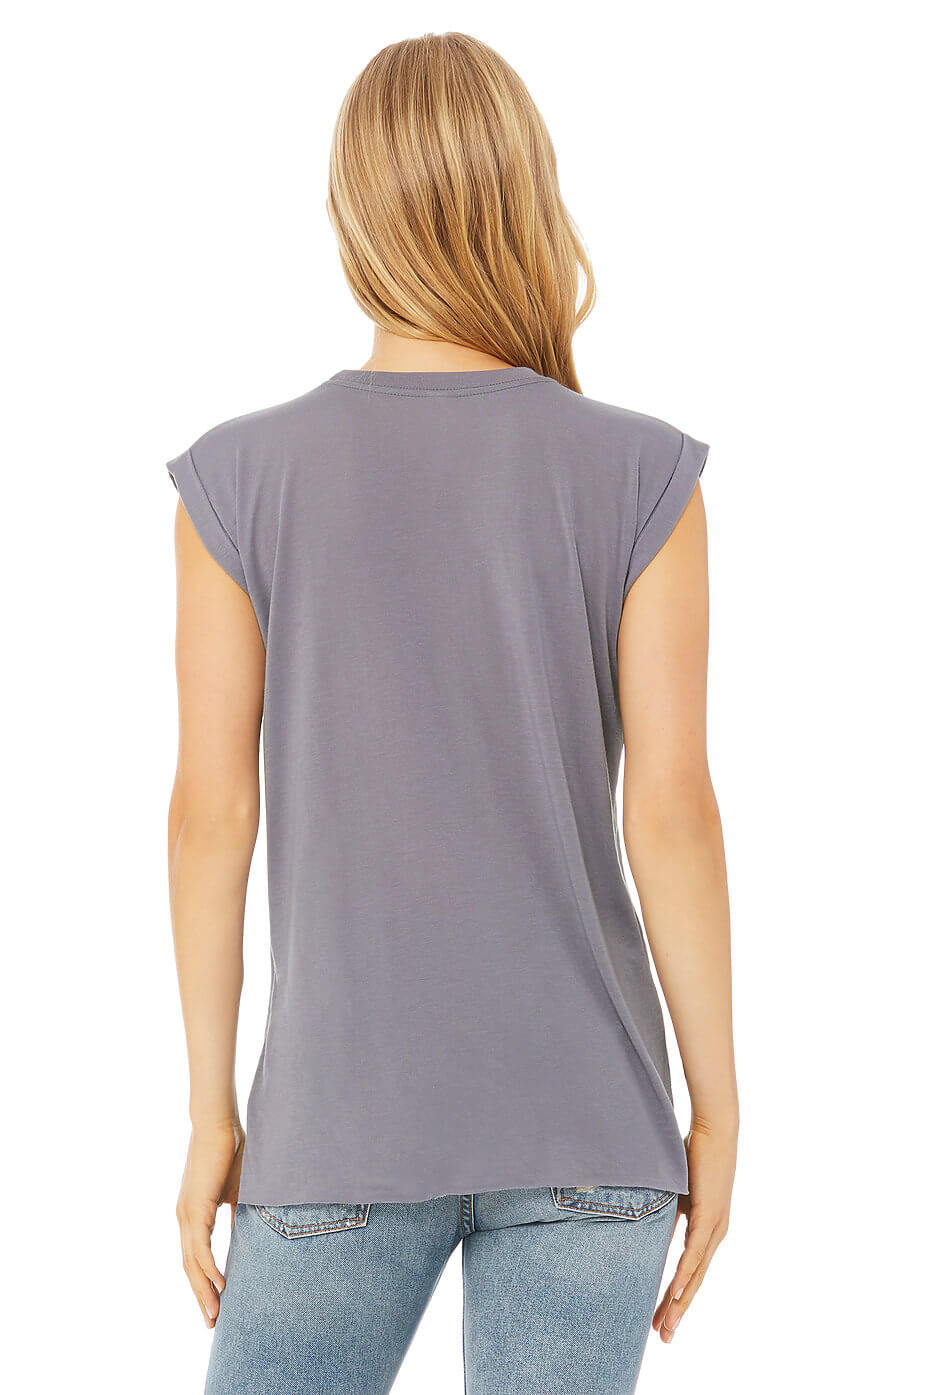 WOMEN'S FLOWY MUSCLE TEE WITH ROLLED CUFF